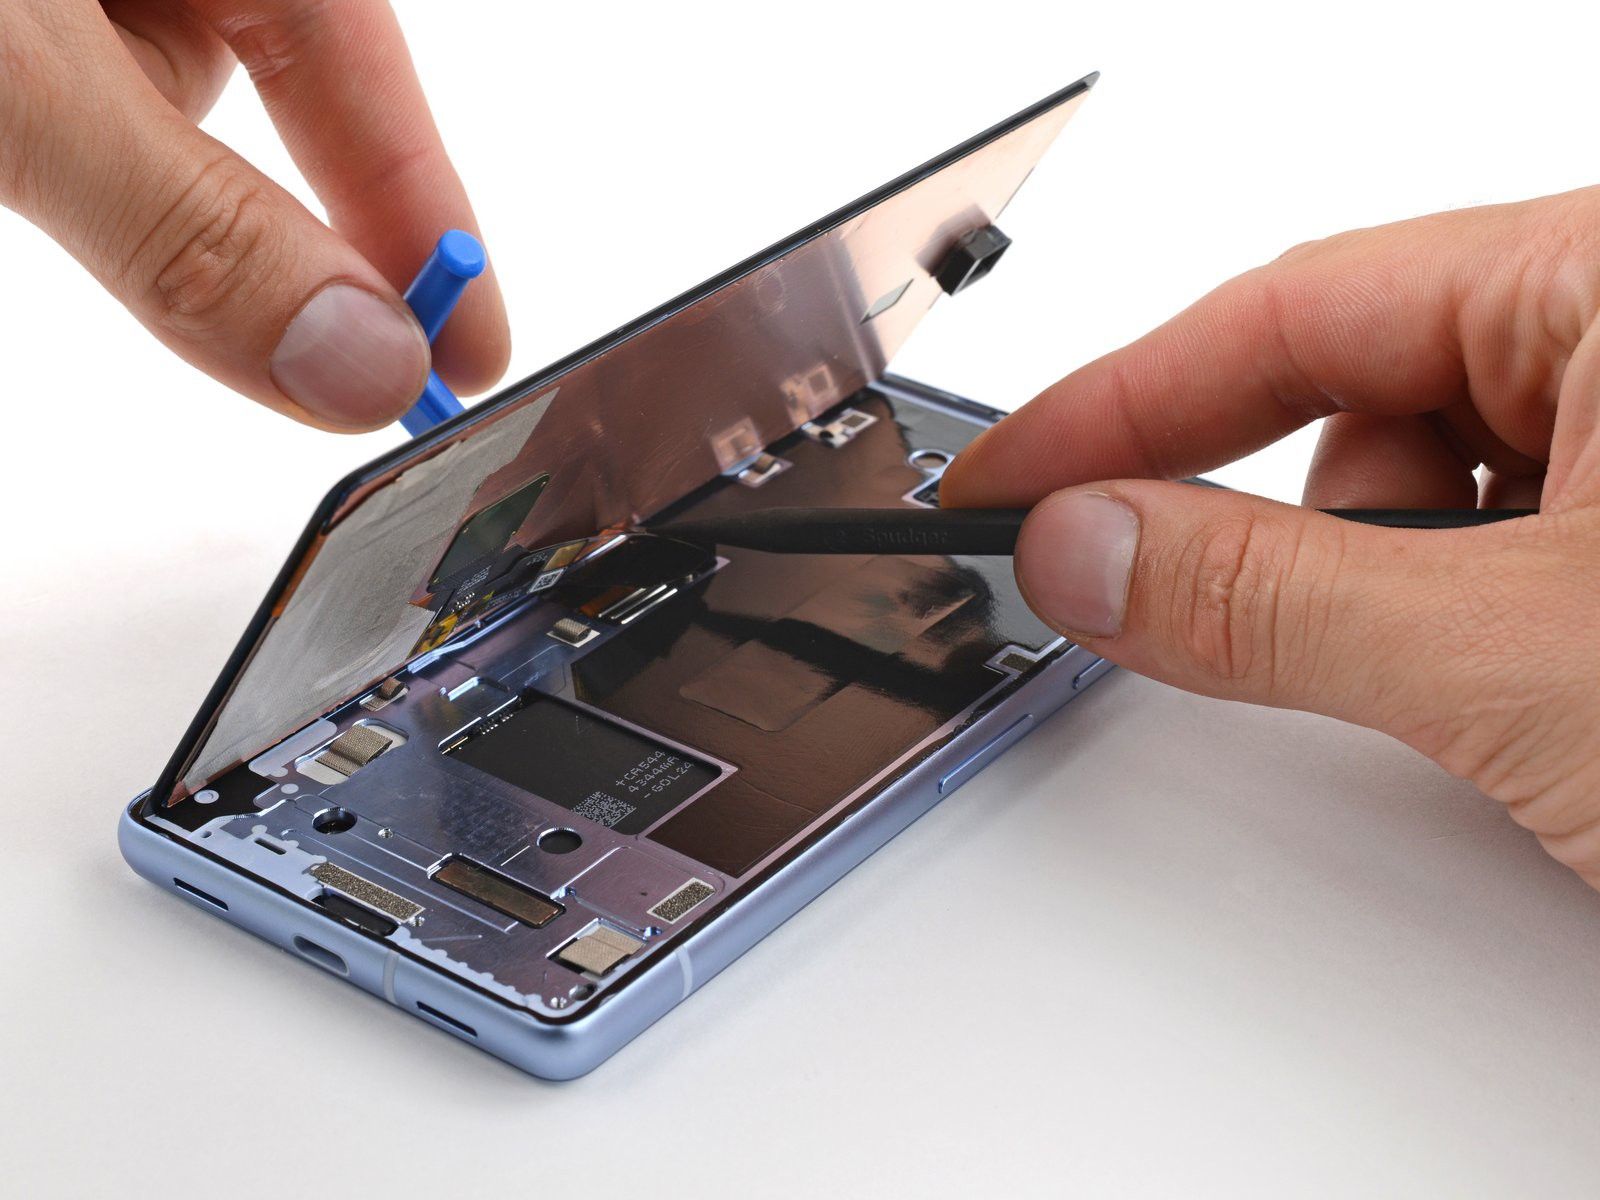 A Pixel 7a being repaired with it's screen being removed from the body of the phone